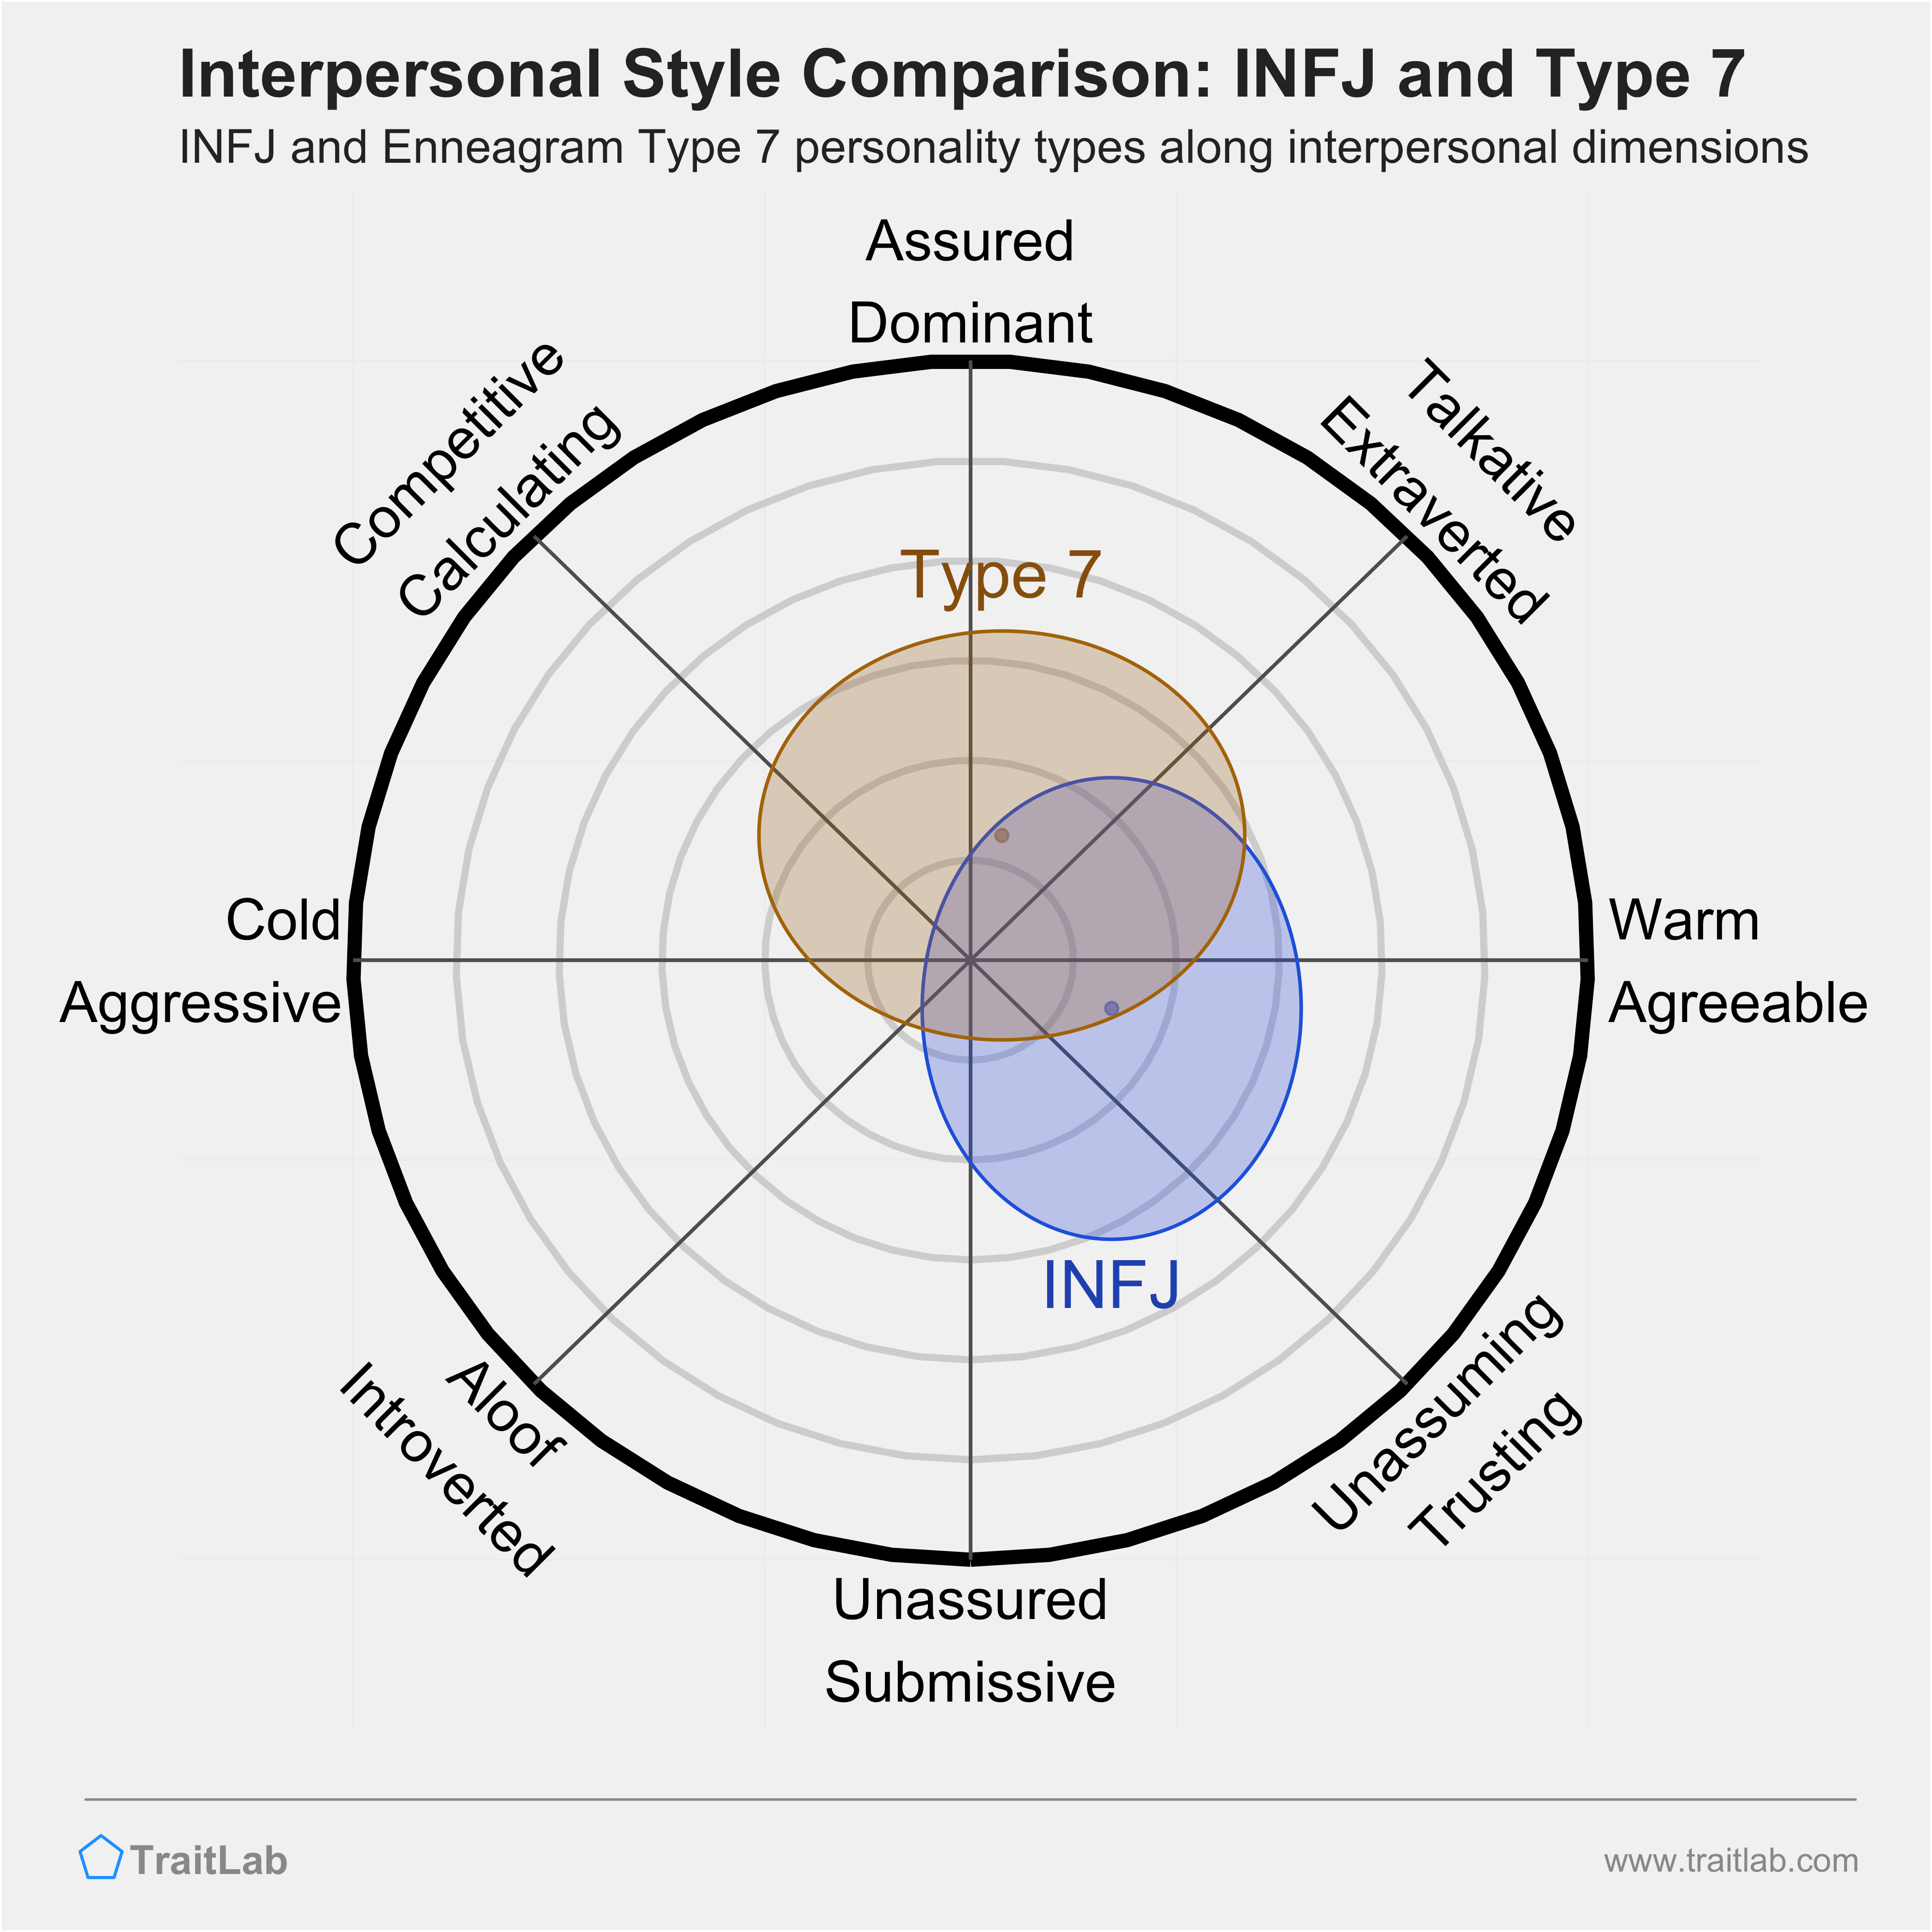 Enneagram INFJ and Type 7 comparison across interpersonal dimensions